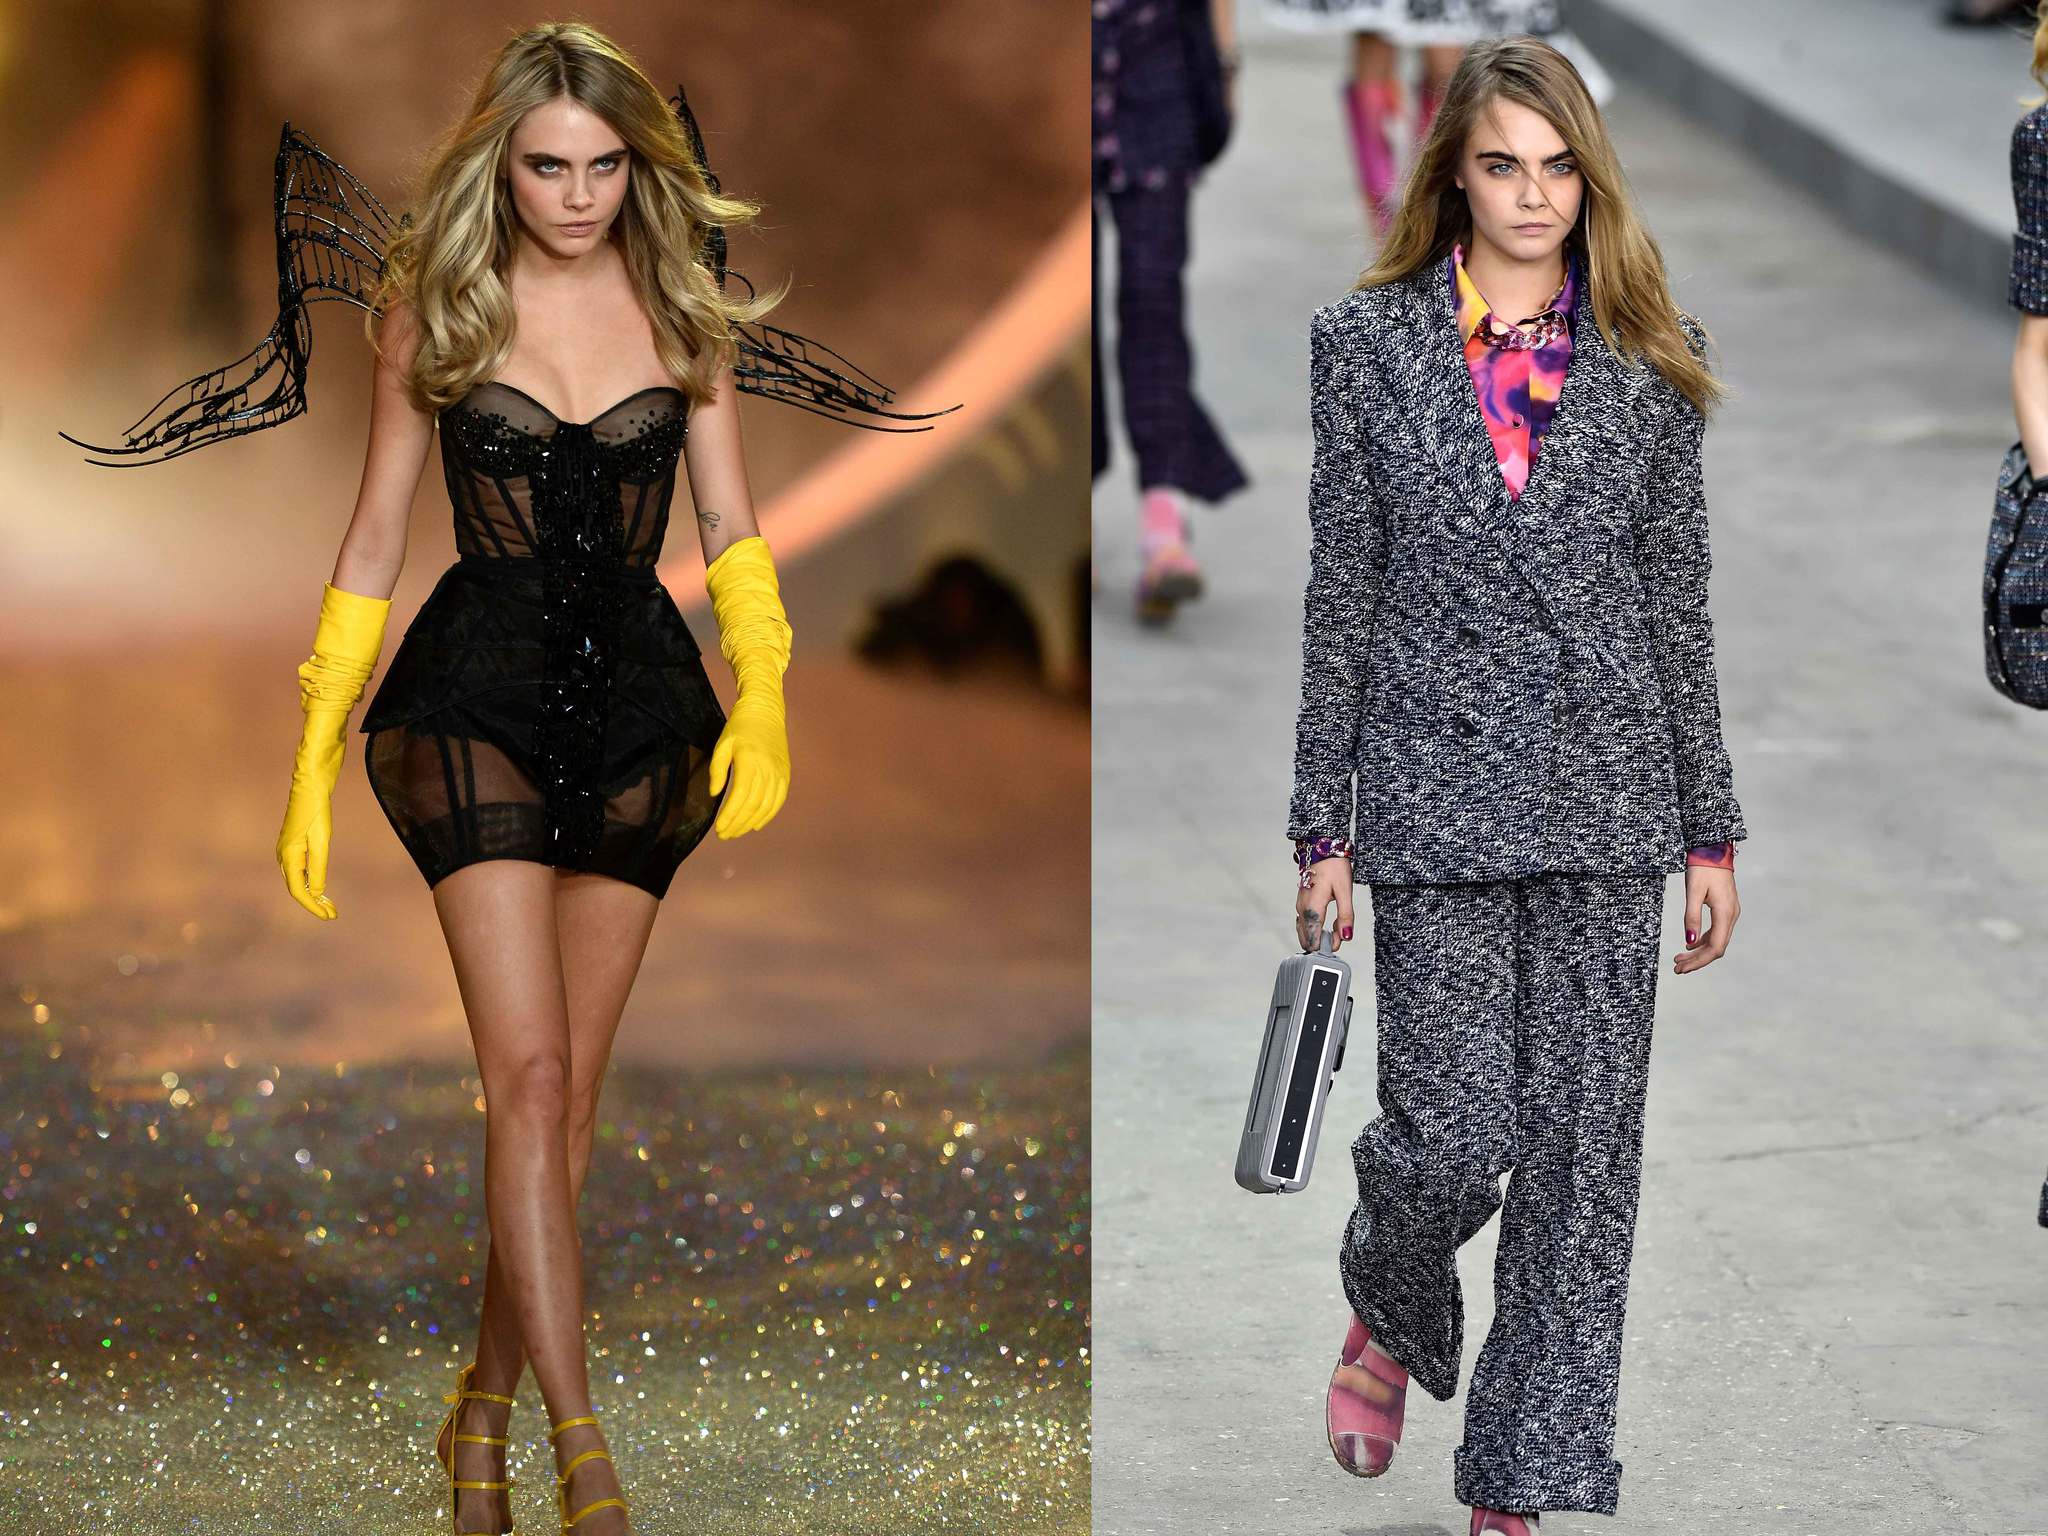 Decision time for Cara Delevingne and Kendall Jenner as Chanel and